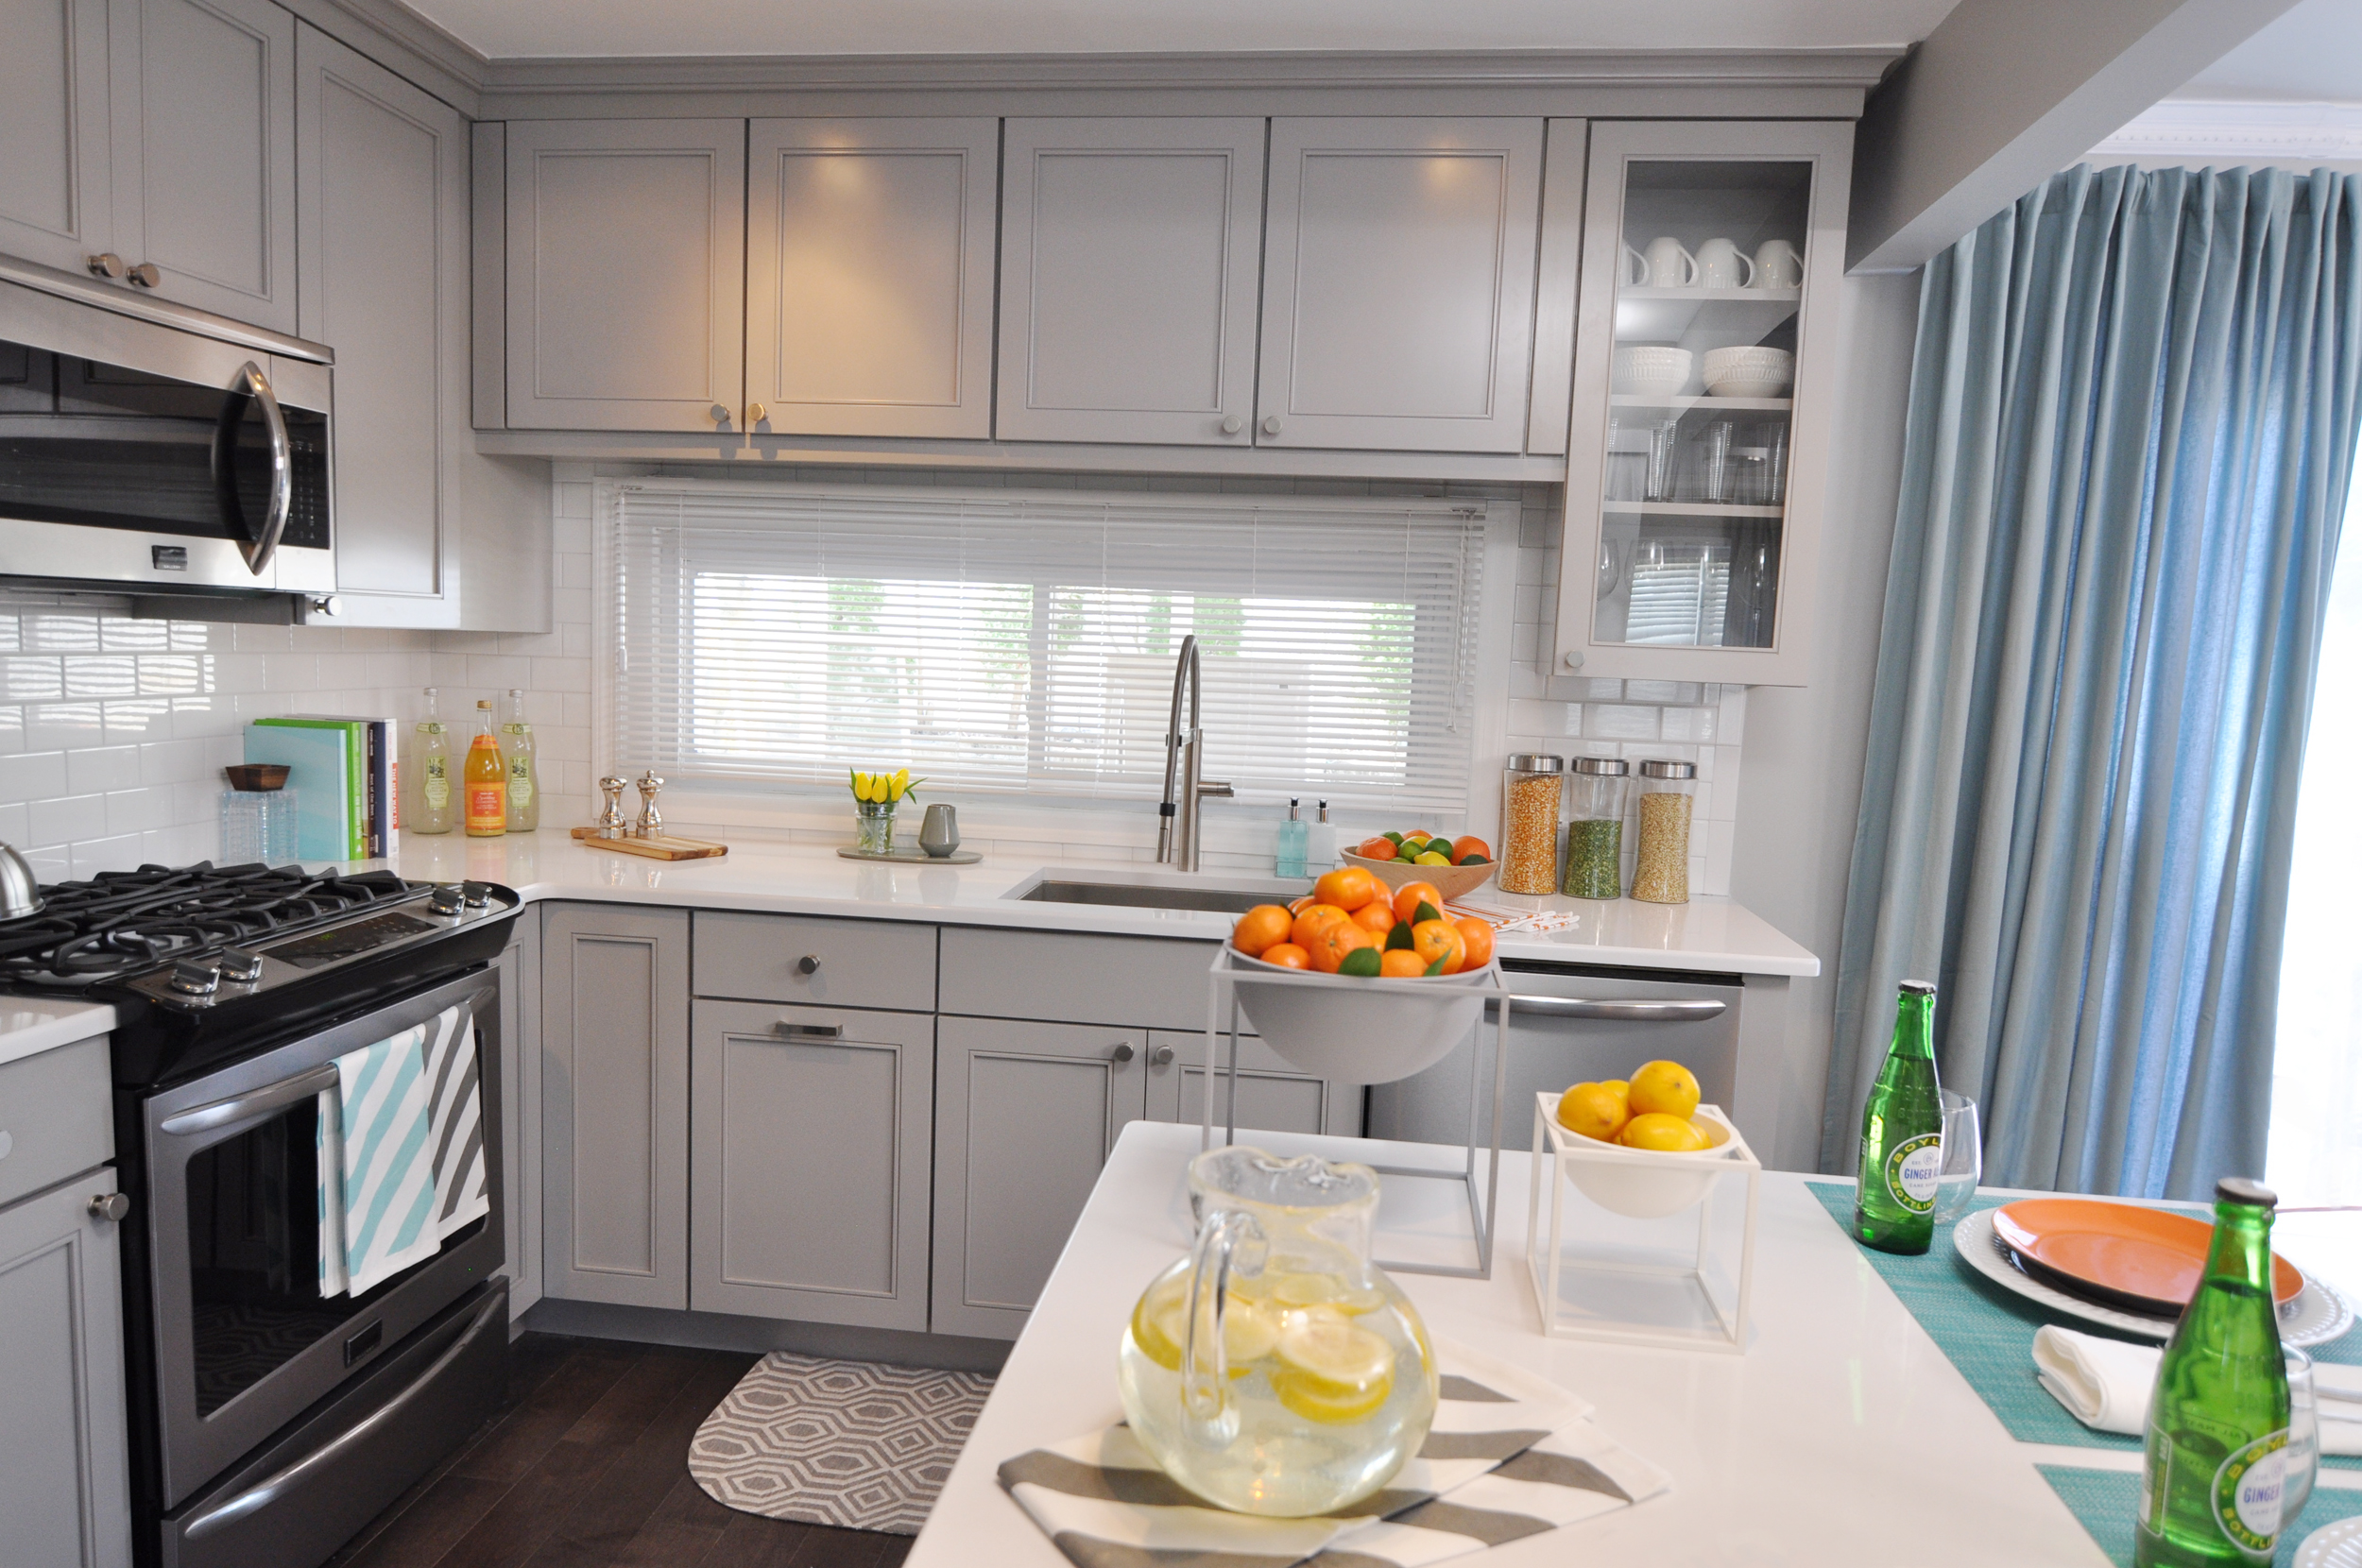 Kim Mitchell_Production Designer_HGTV_Buying and Selling with The Property Brothers_Season 3_Episode 316_Kitchen Remodel_Grey Kitchen Cabinets_Kitchen Staging.jpg